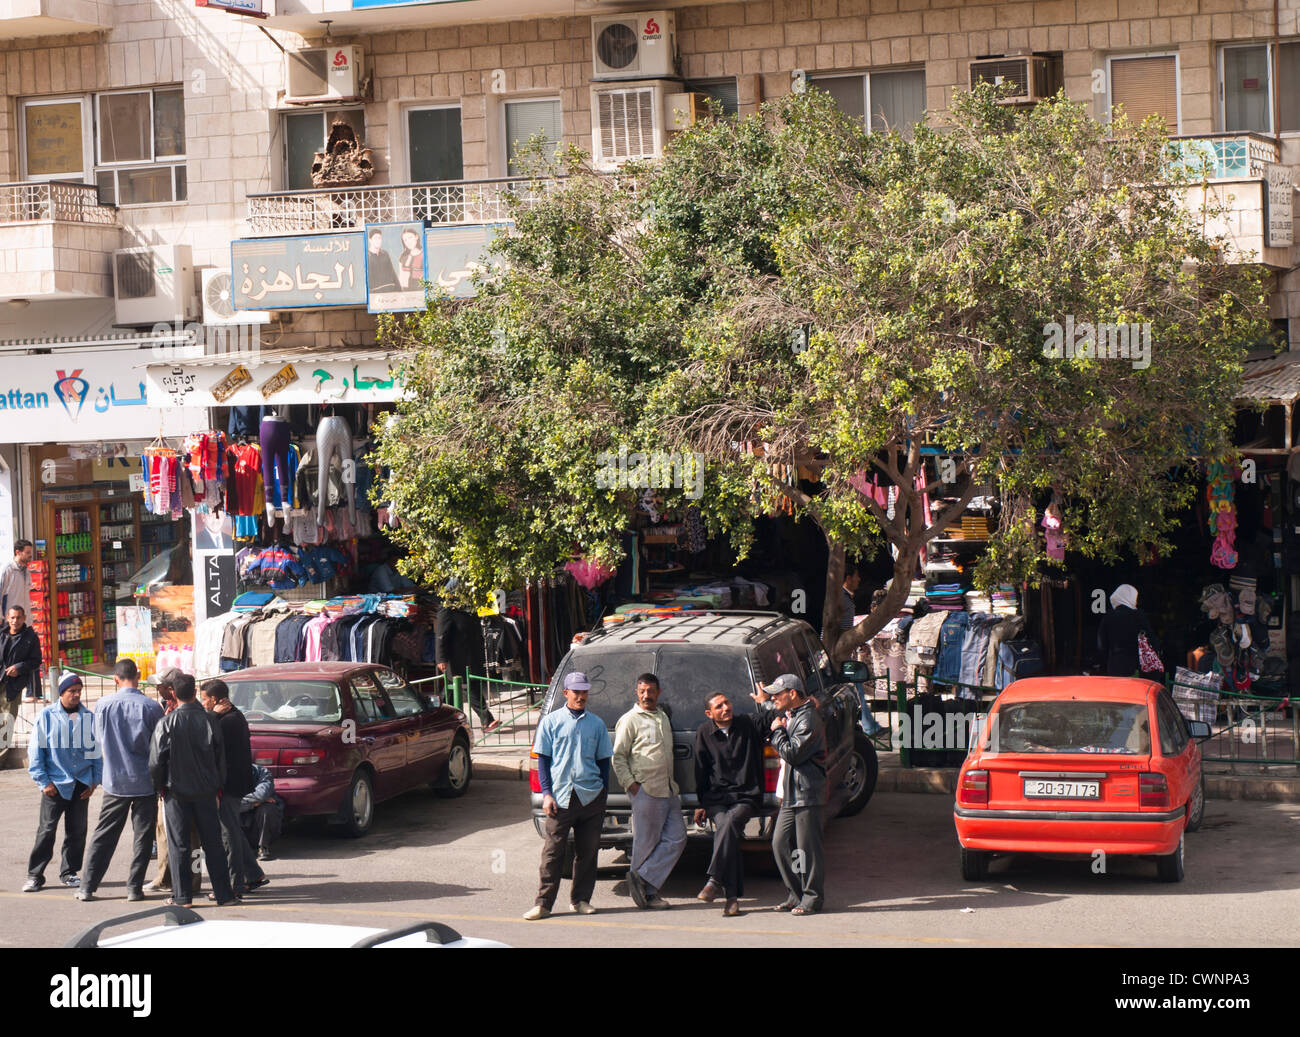 Everyday life in a shopping street in Aqaba Jordan with shop fronts goods on display , of med discussing and cars Stock Photo Alamy